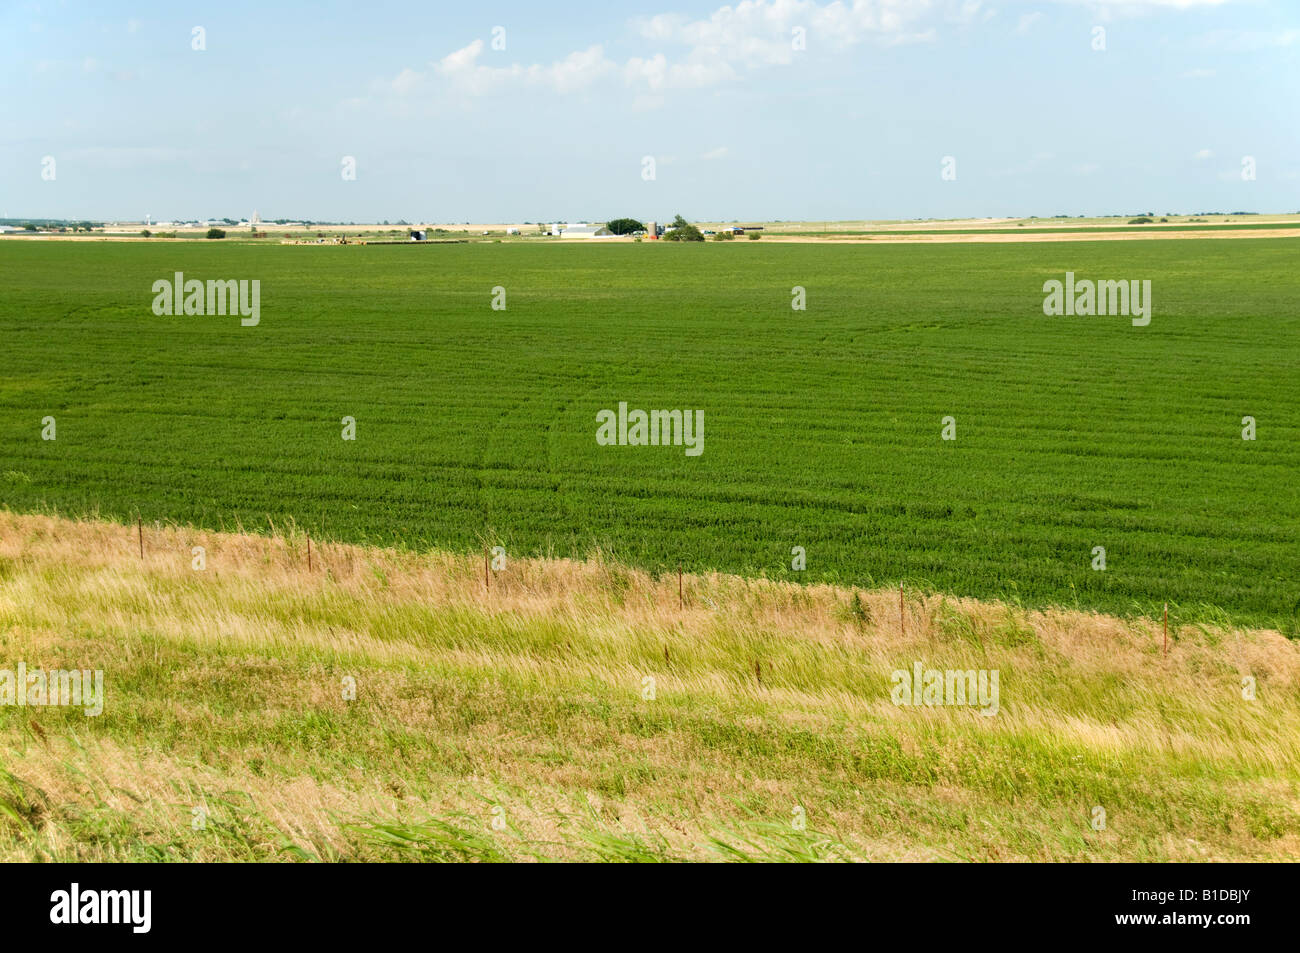 A field of alfalfa grown for hay in central Oklahoma, USA, North America. Stock Photo